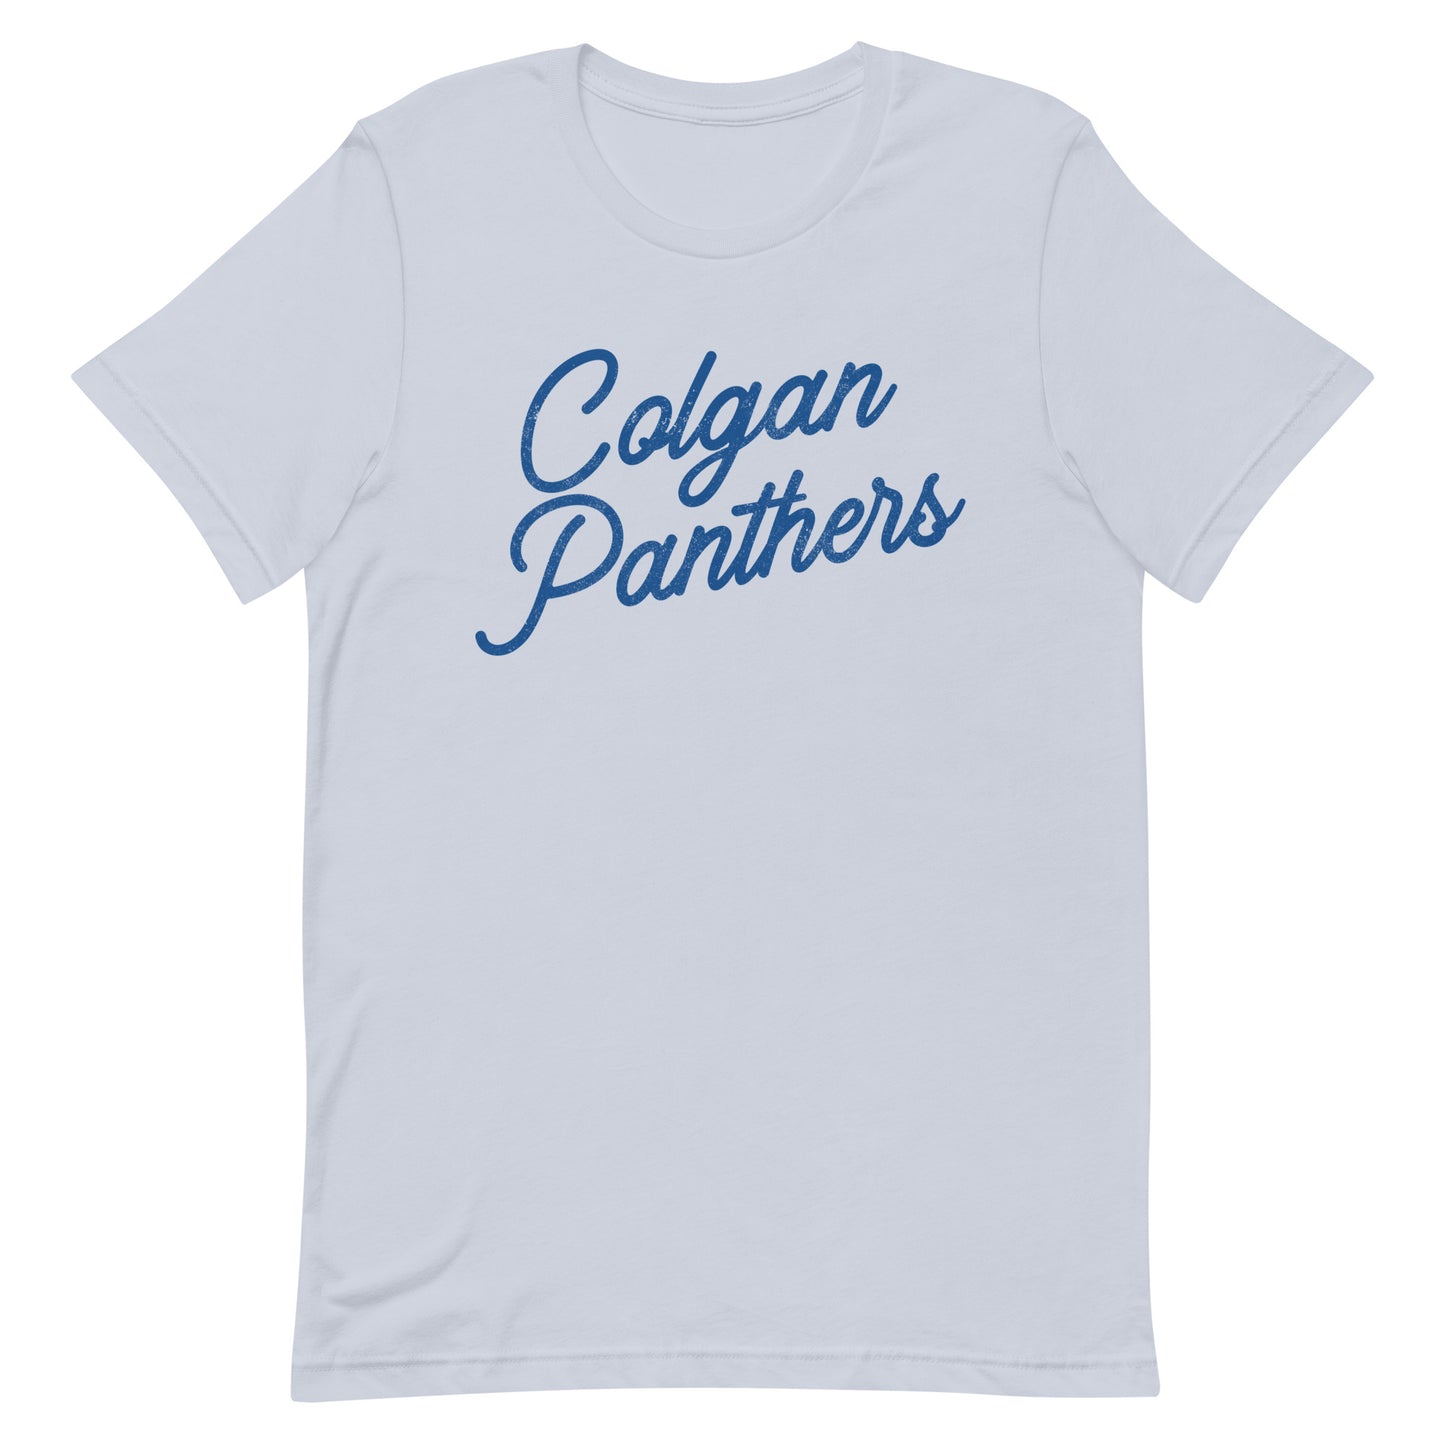 Panthers Retro Distressed Tee